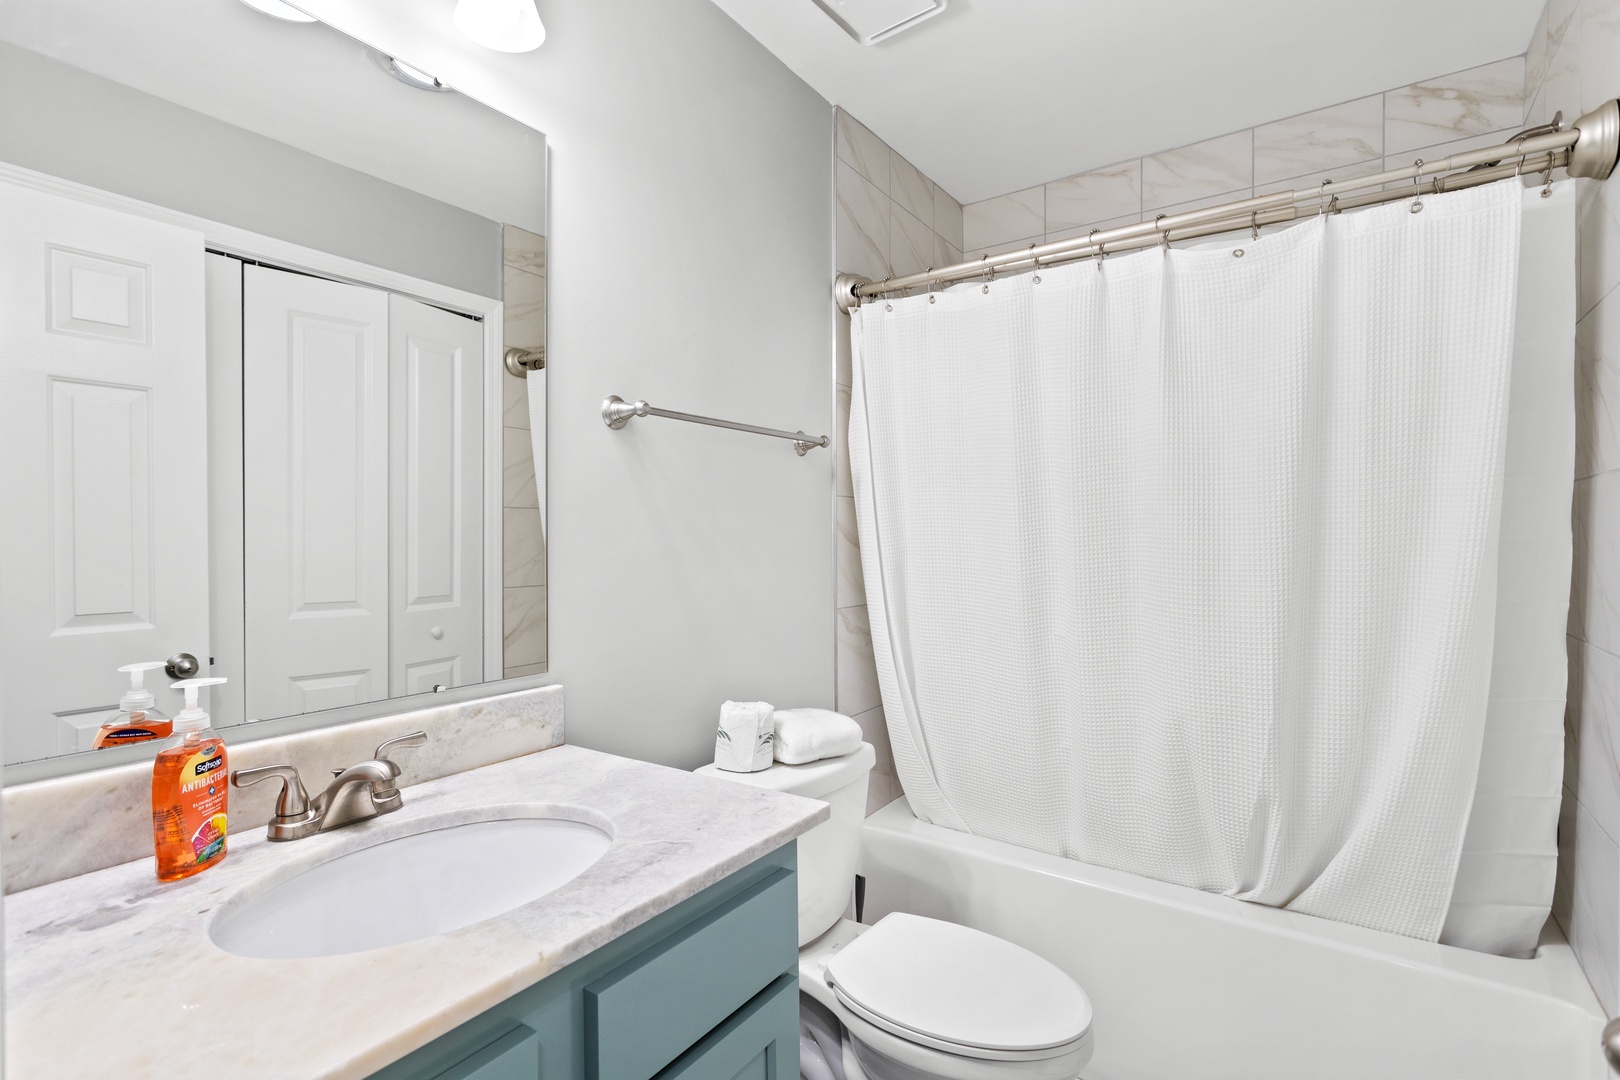 The shared bathroom with a shower-tub combination